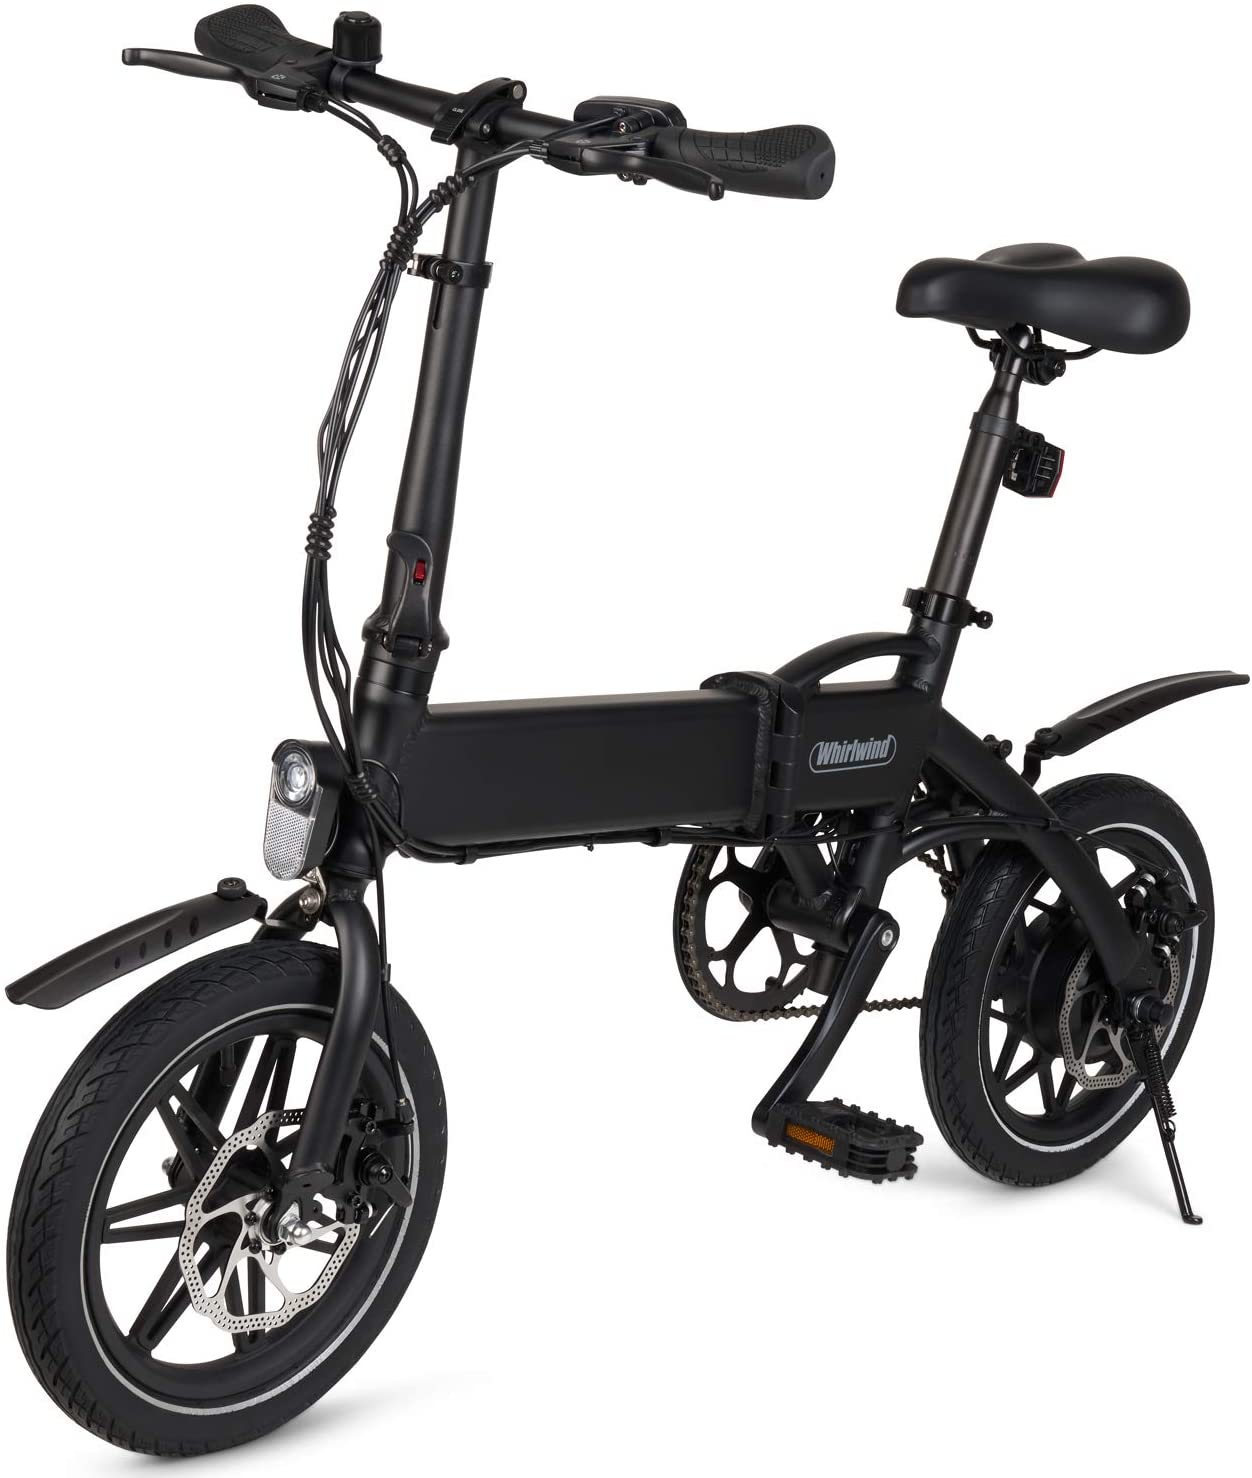 WHIRLWIND C4 Lightweight 250W Electric Bike With Pedal Assistance